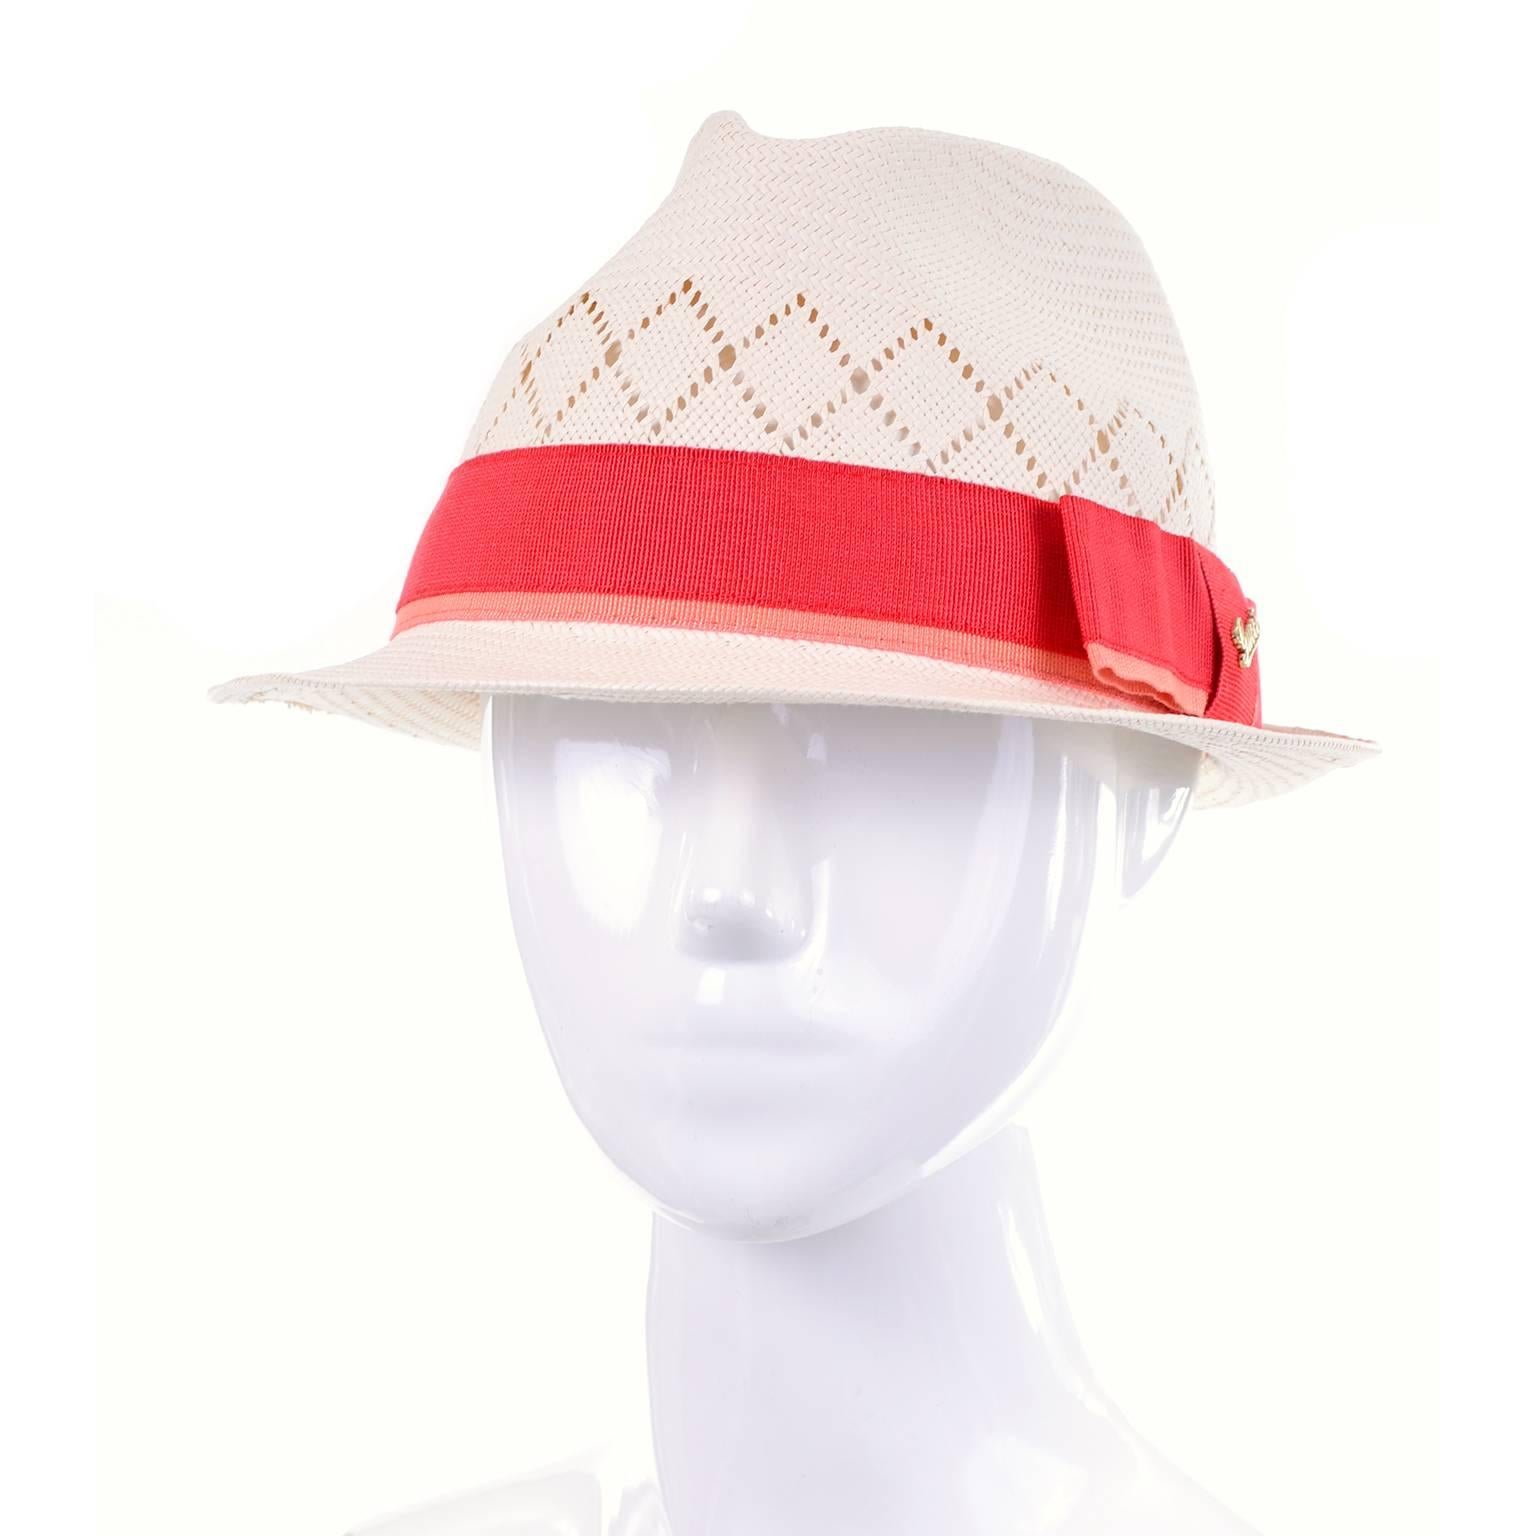 This beautiful natural straw fedora hat from Gucci is in as new condition.  This designer hat has a short brim that curves up at the back, and a burnt orange and salmon ribbon. There is a bow on the right side of the hat, and a gold tone Gucci pin